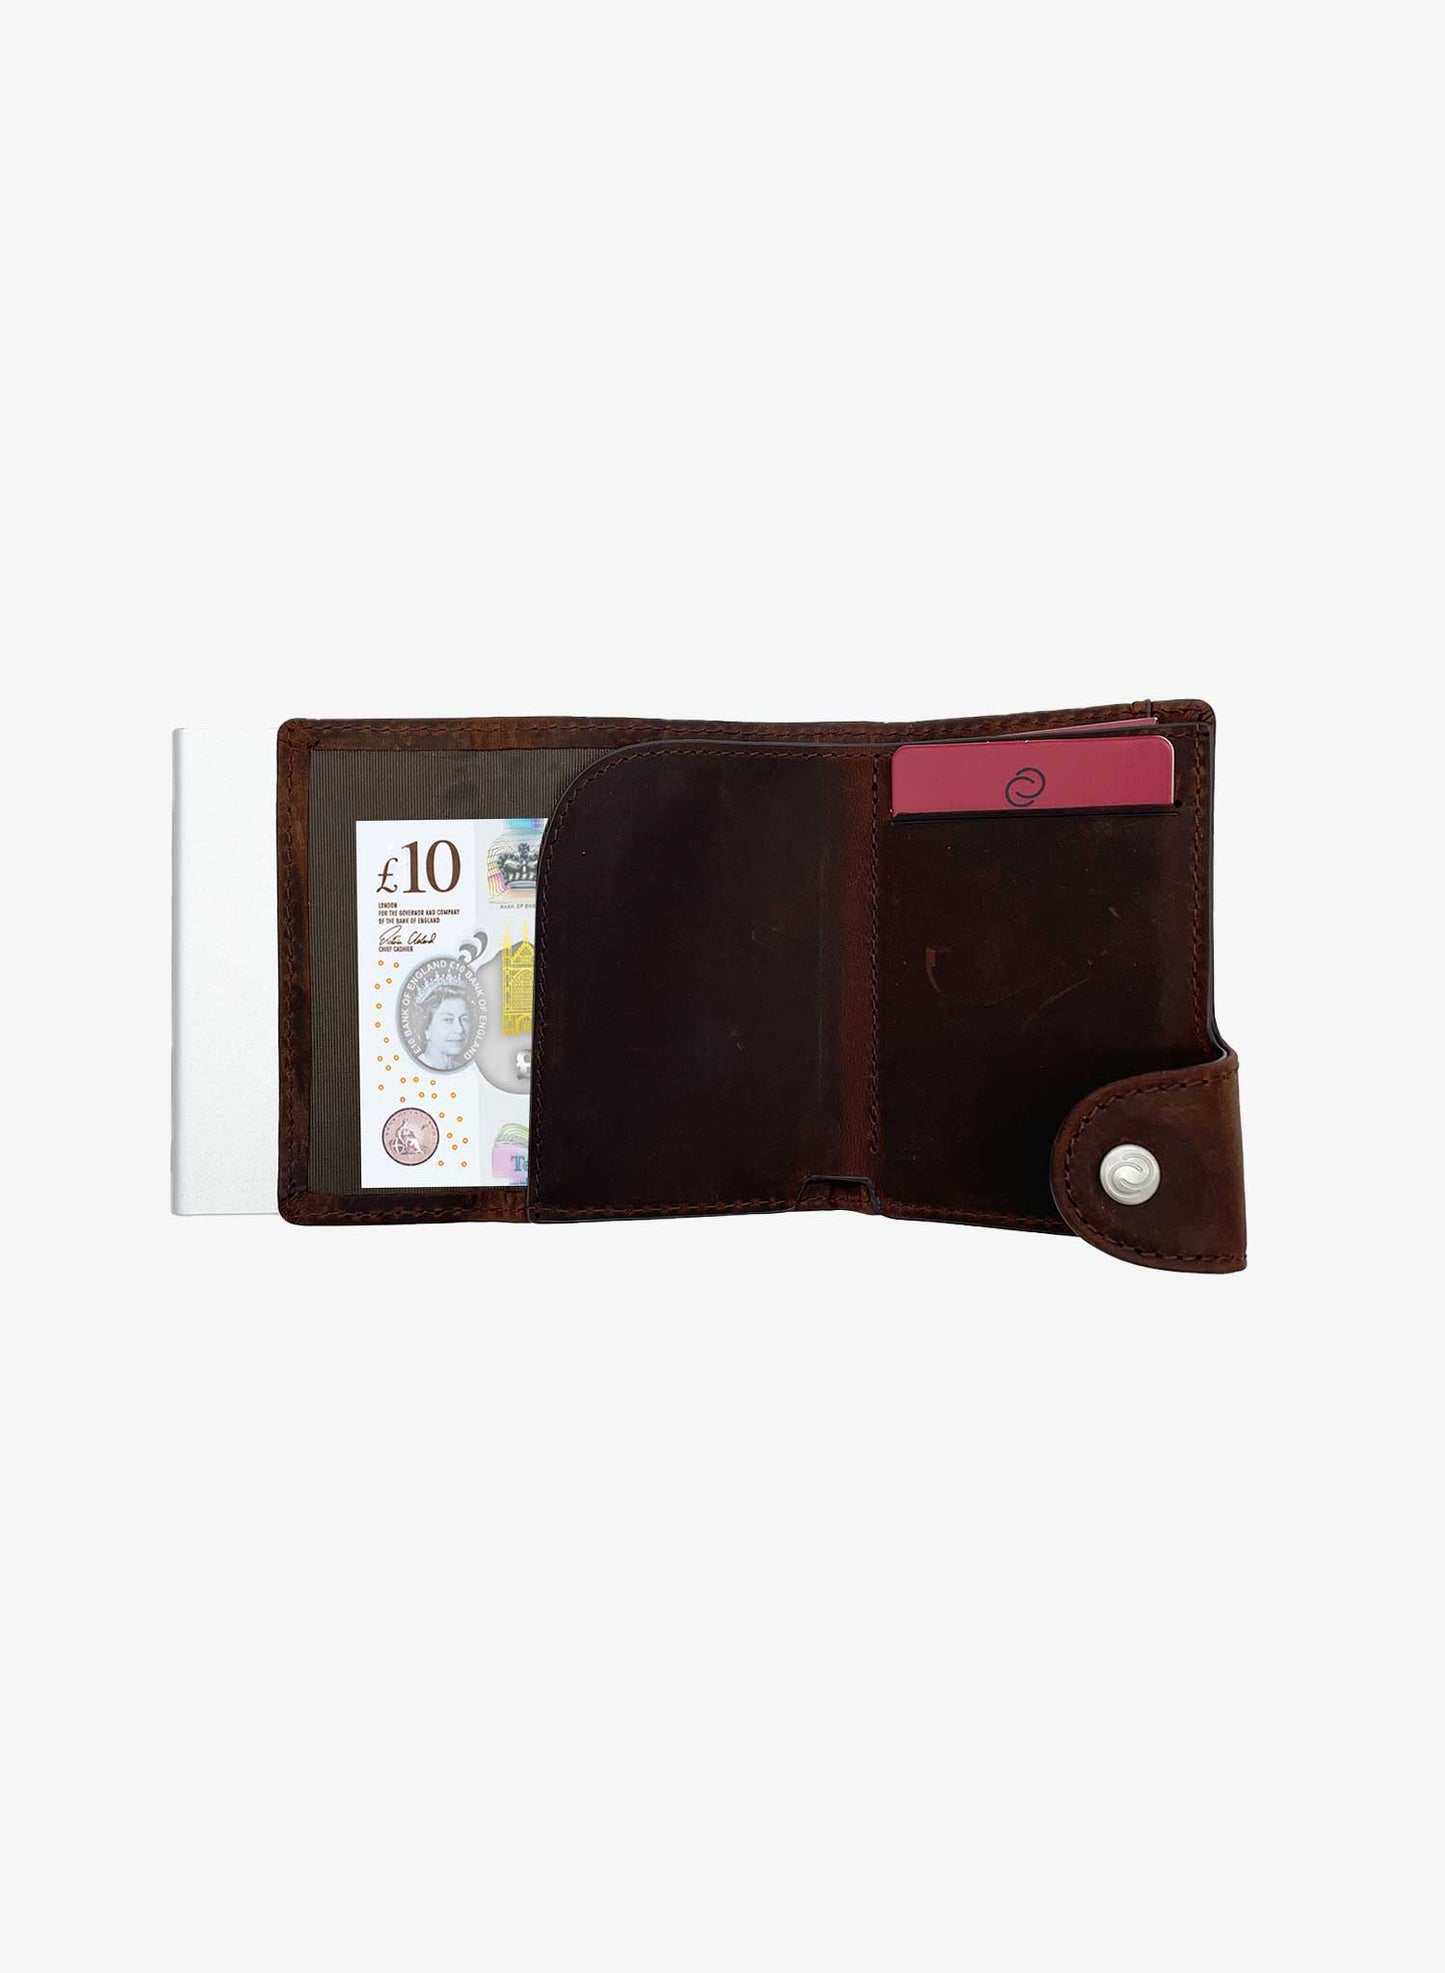 C-Secure Men's Leather Wallet with RFID protection